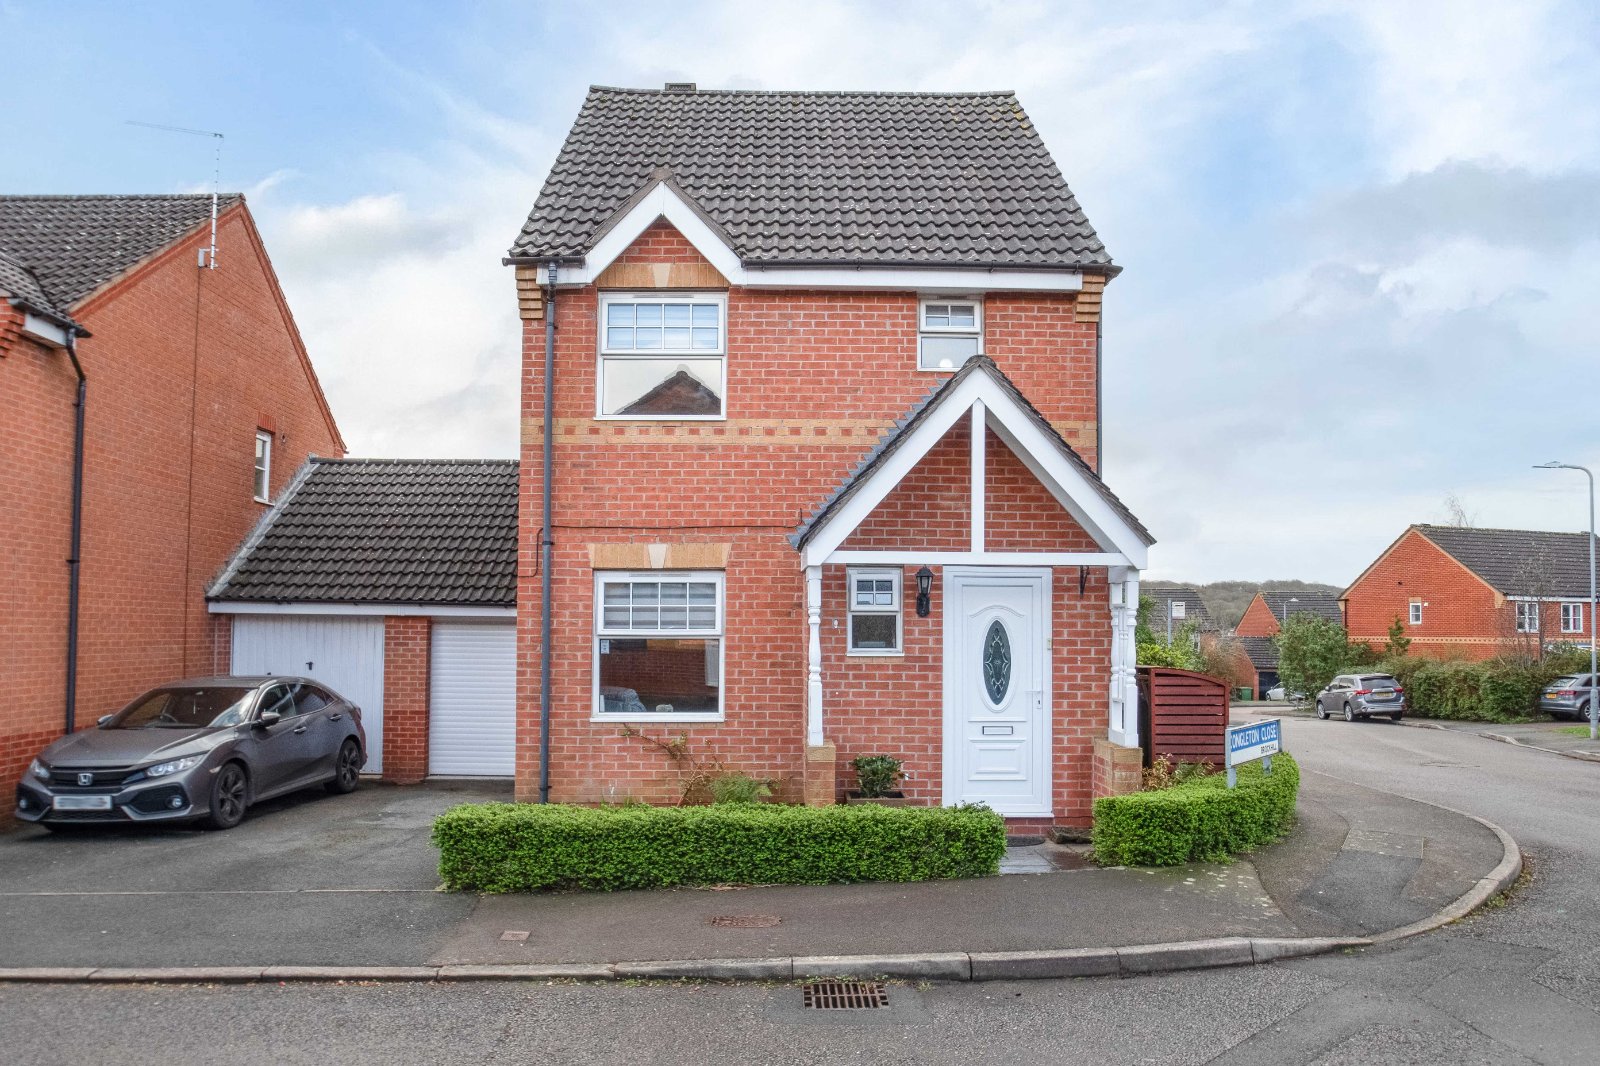 3 bed house for sale in Congleton Close, Brockhill 21